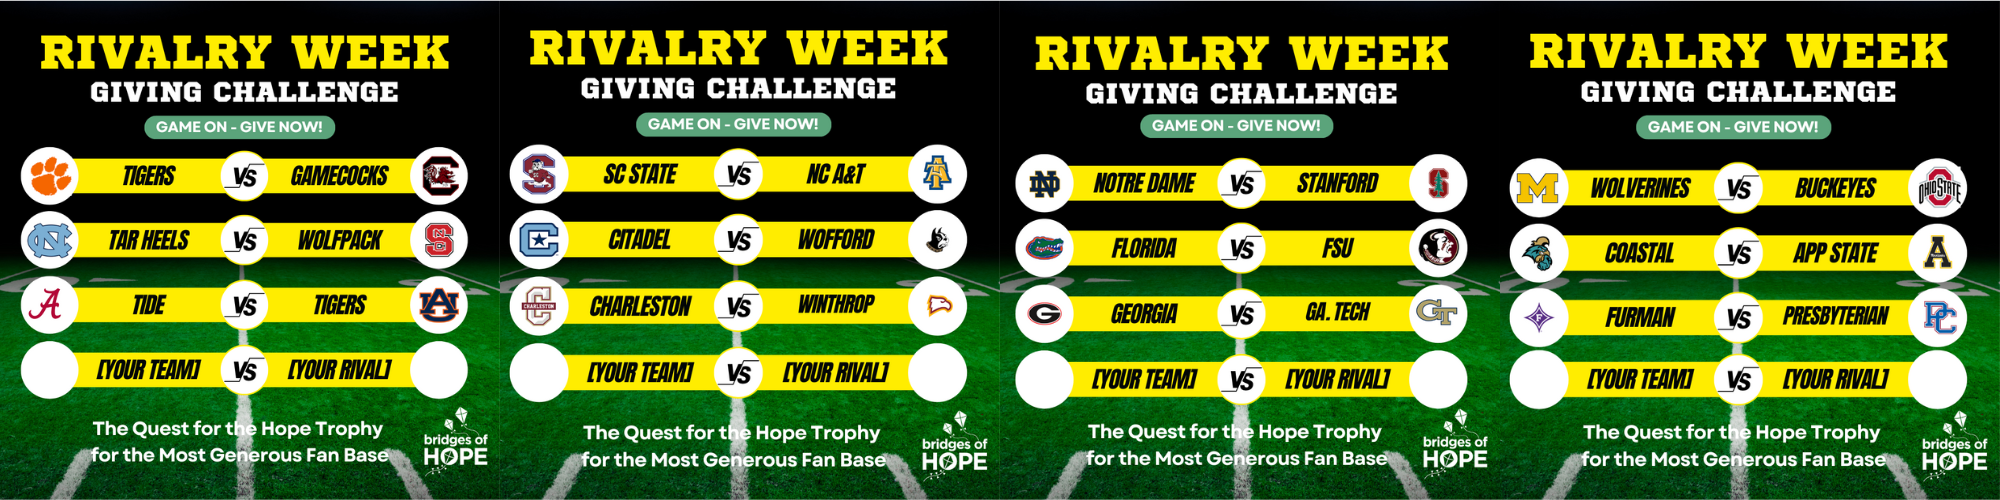 Rivalry Week Giving Challenge to support Bridges of Hope!